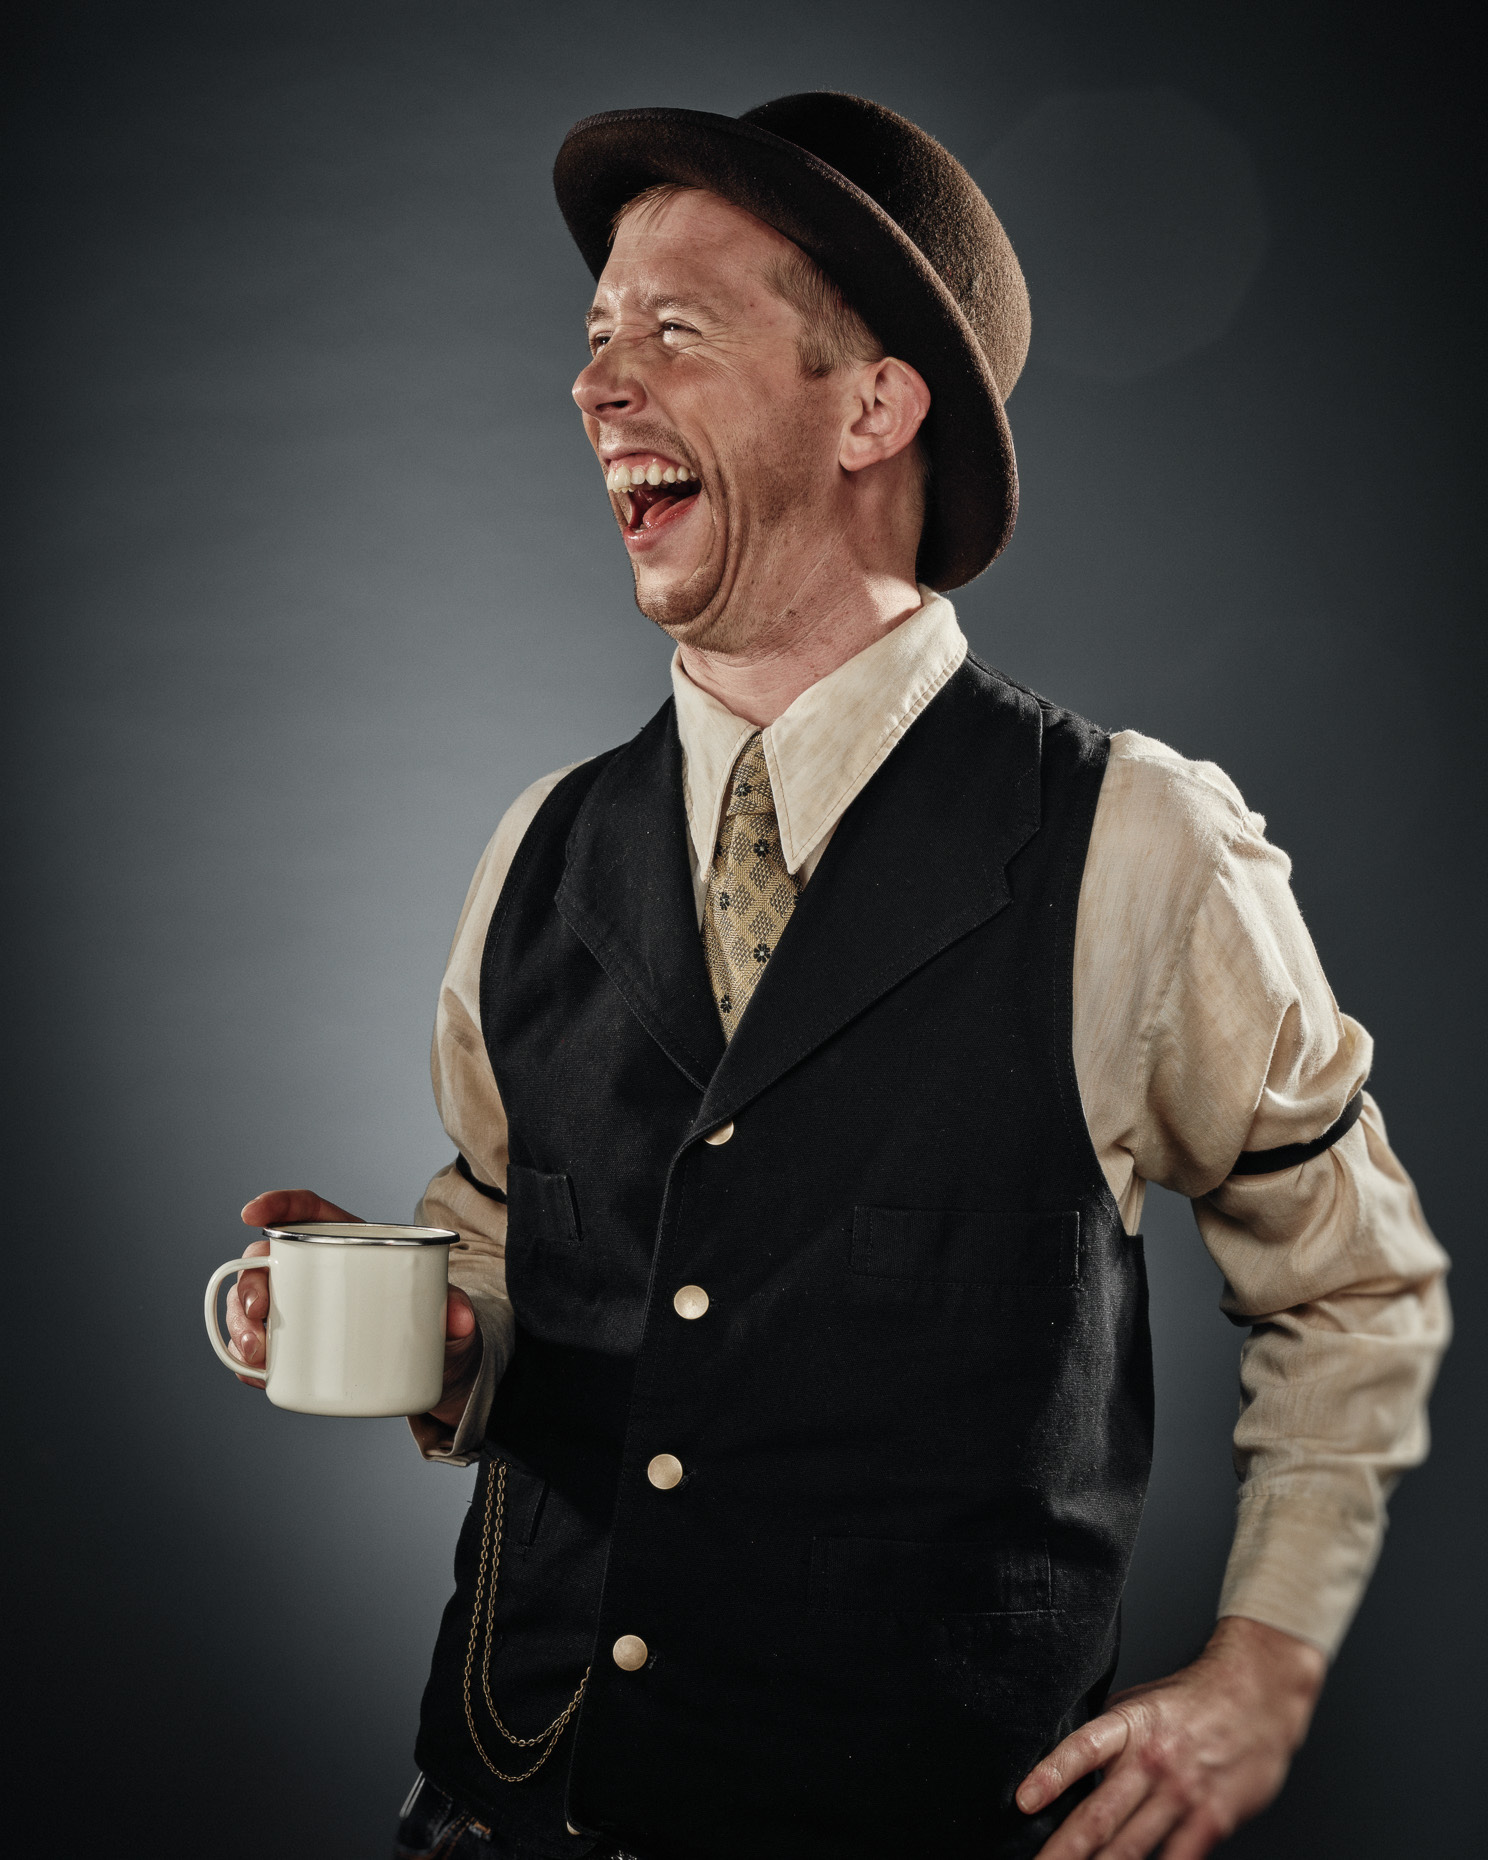 In studio character portrait of improv actor Chad Parsons Curious Comedy Theater Showdown dressed as a saloon bartender holding a metal coffee cup. Photo by Andy Batt